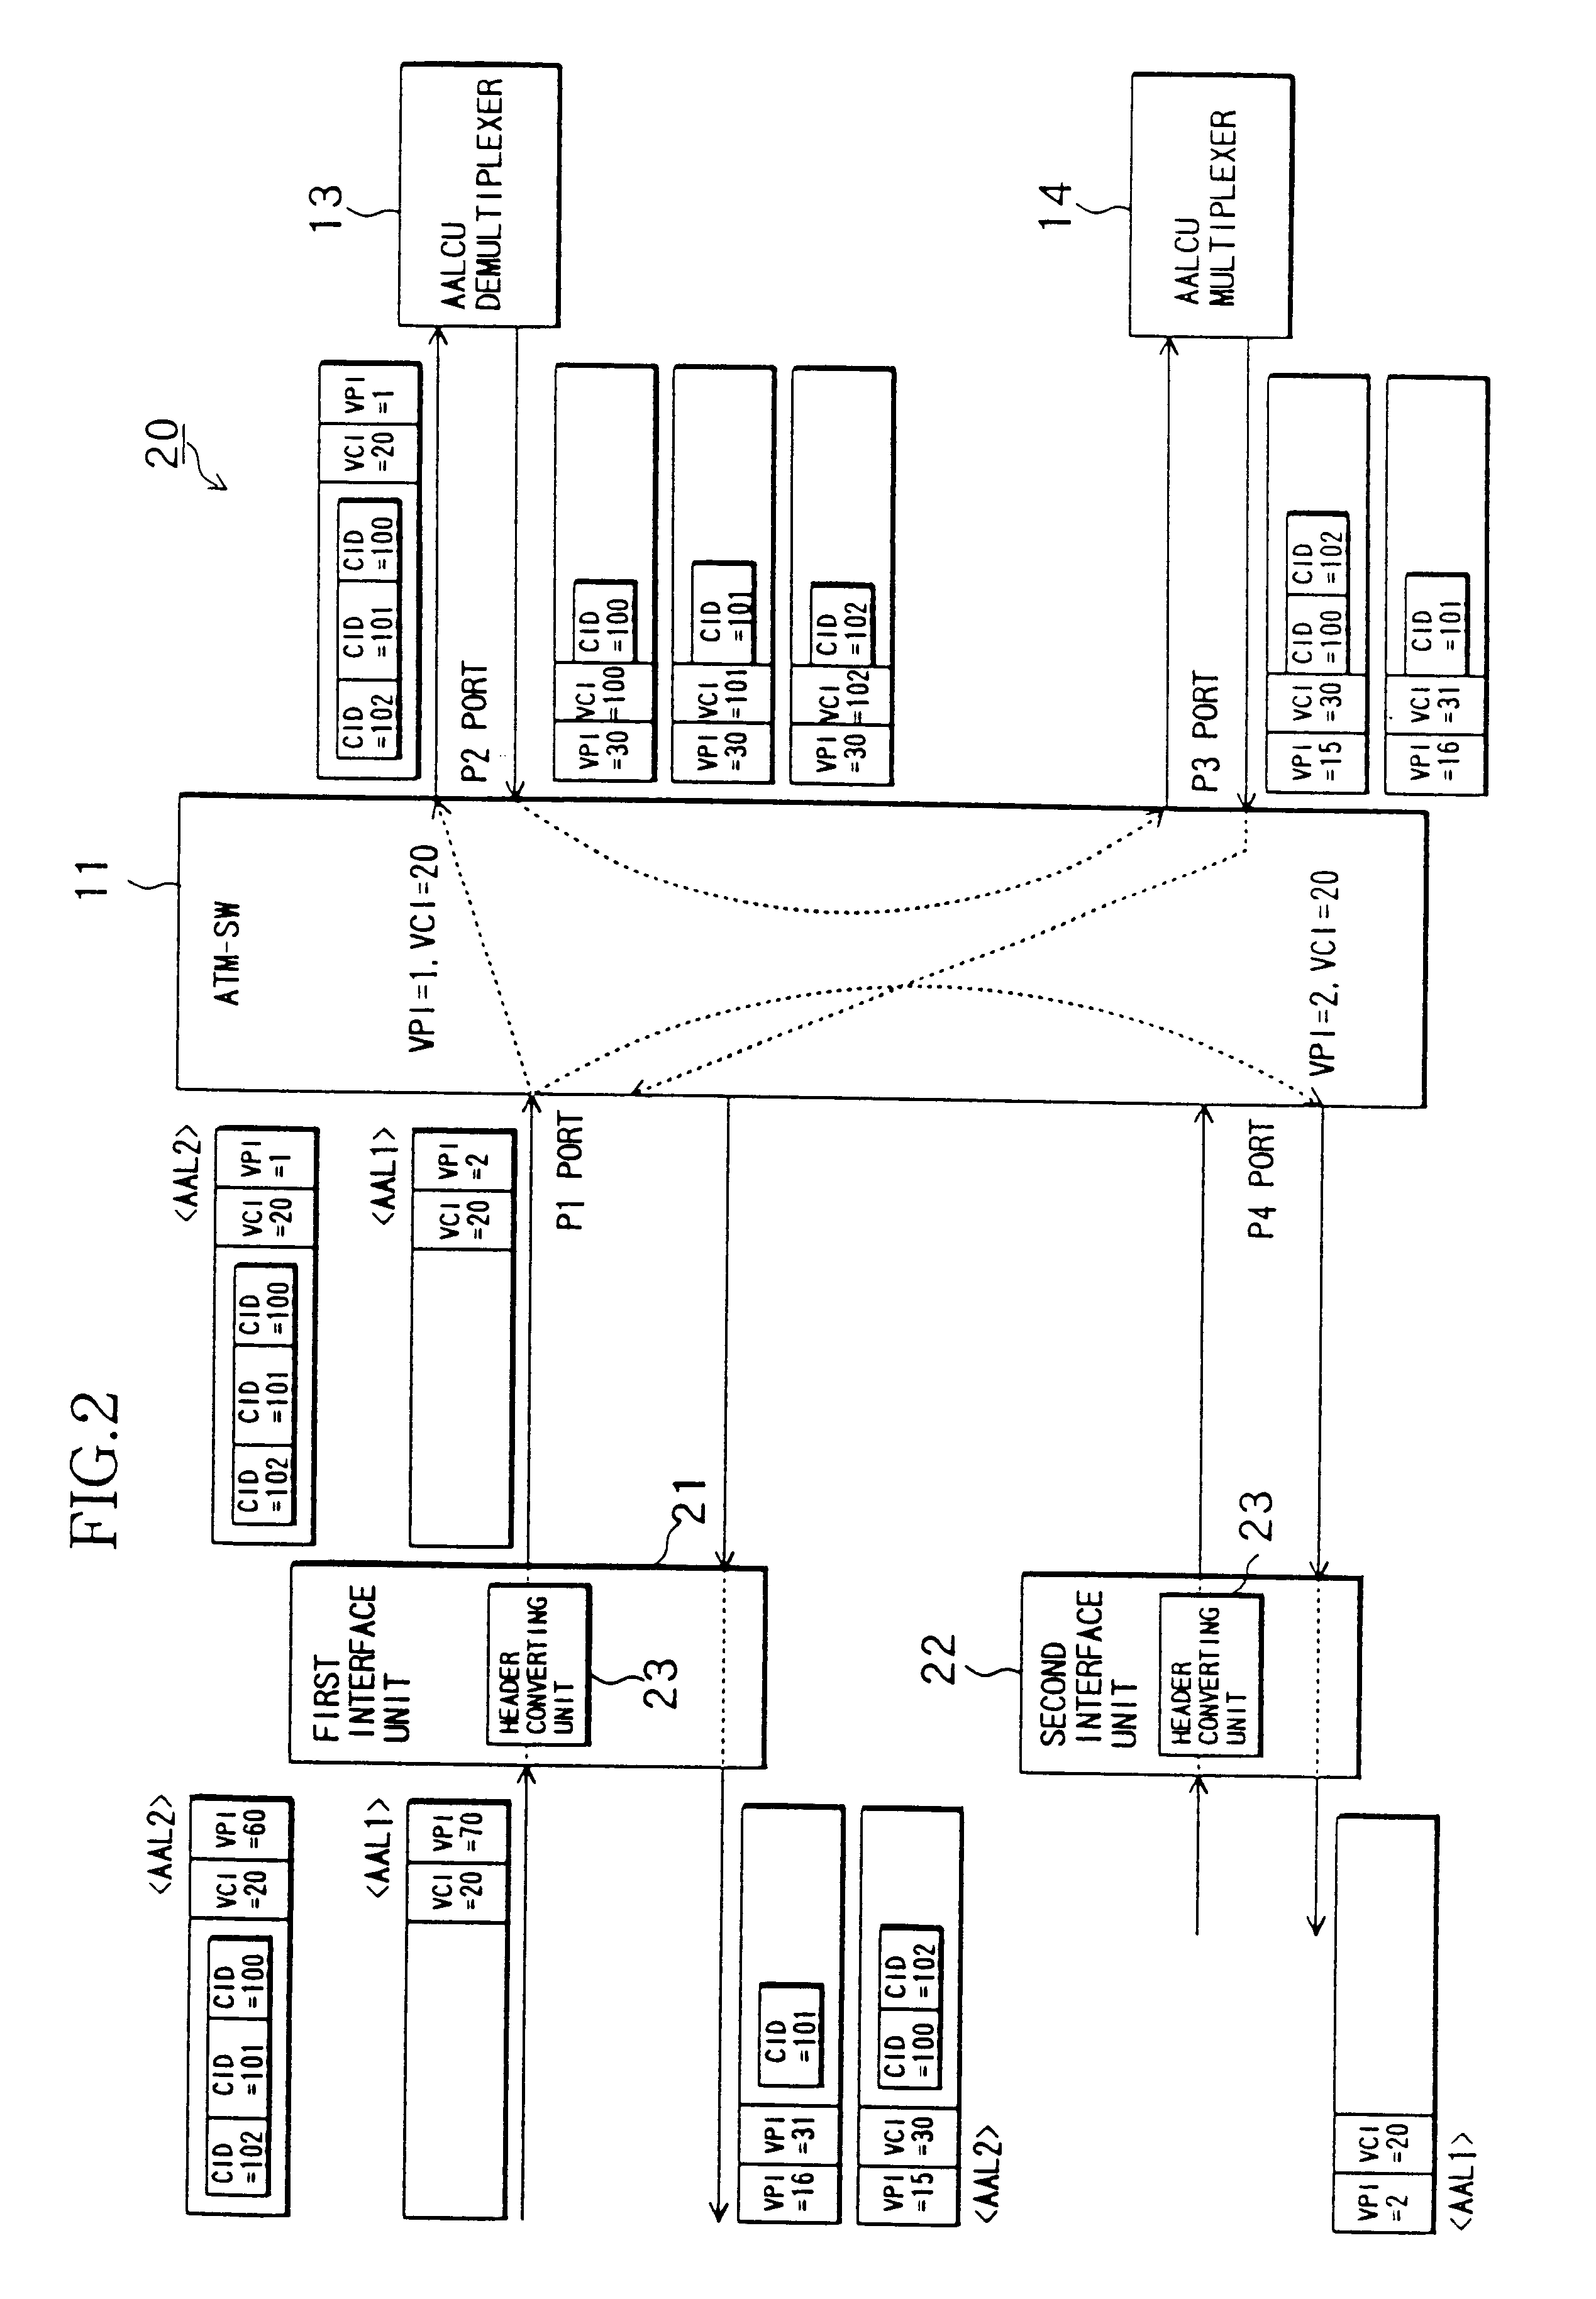 ATM switching apparatus applicable to short cell